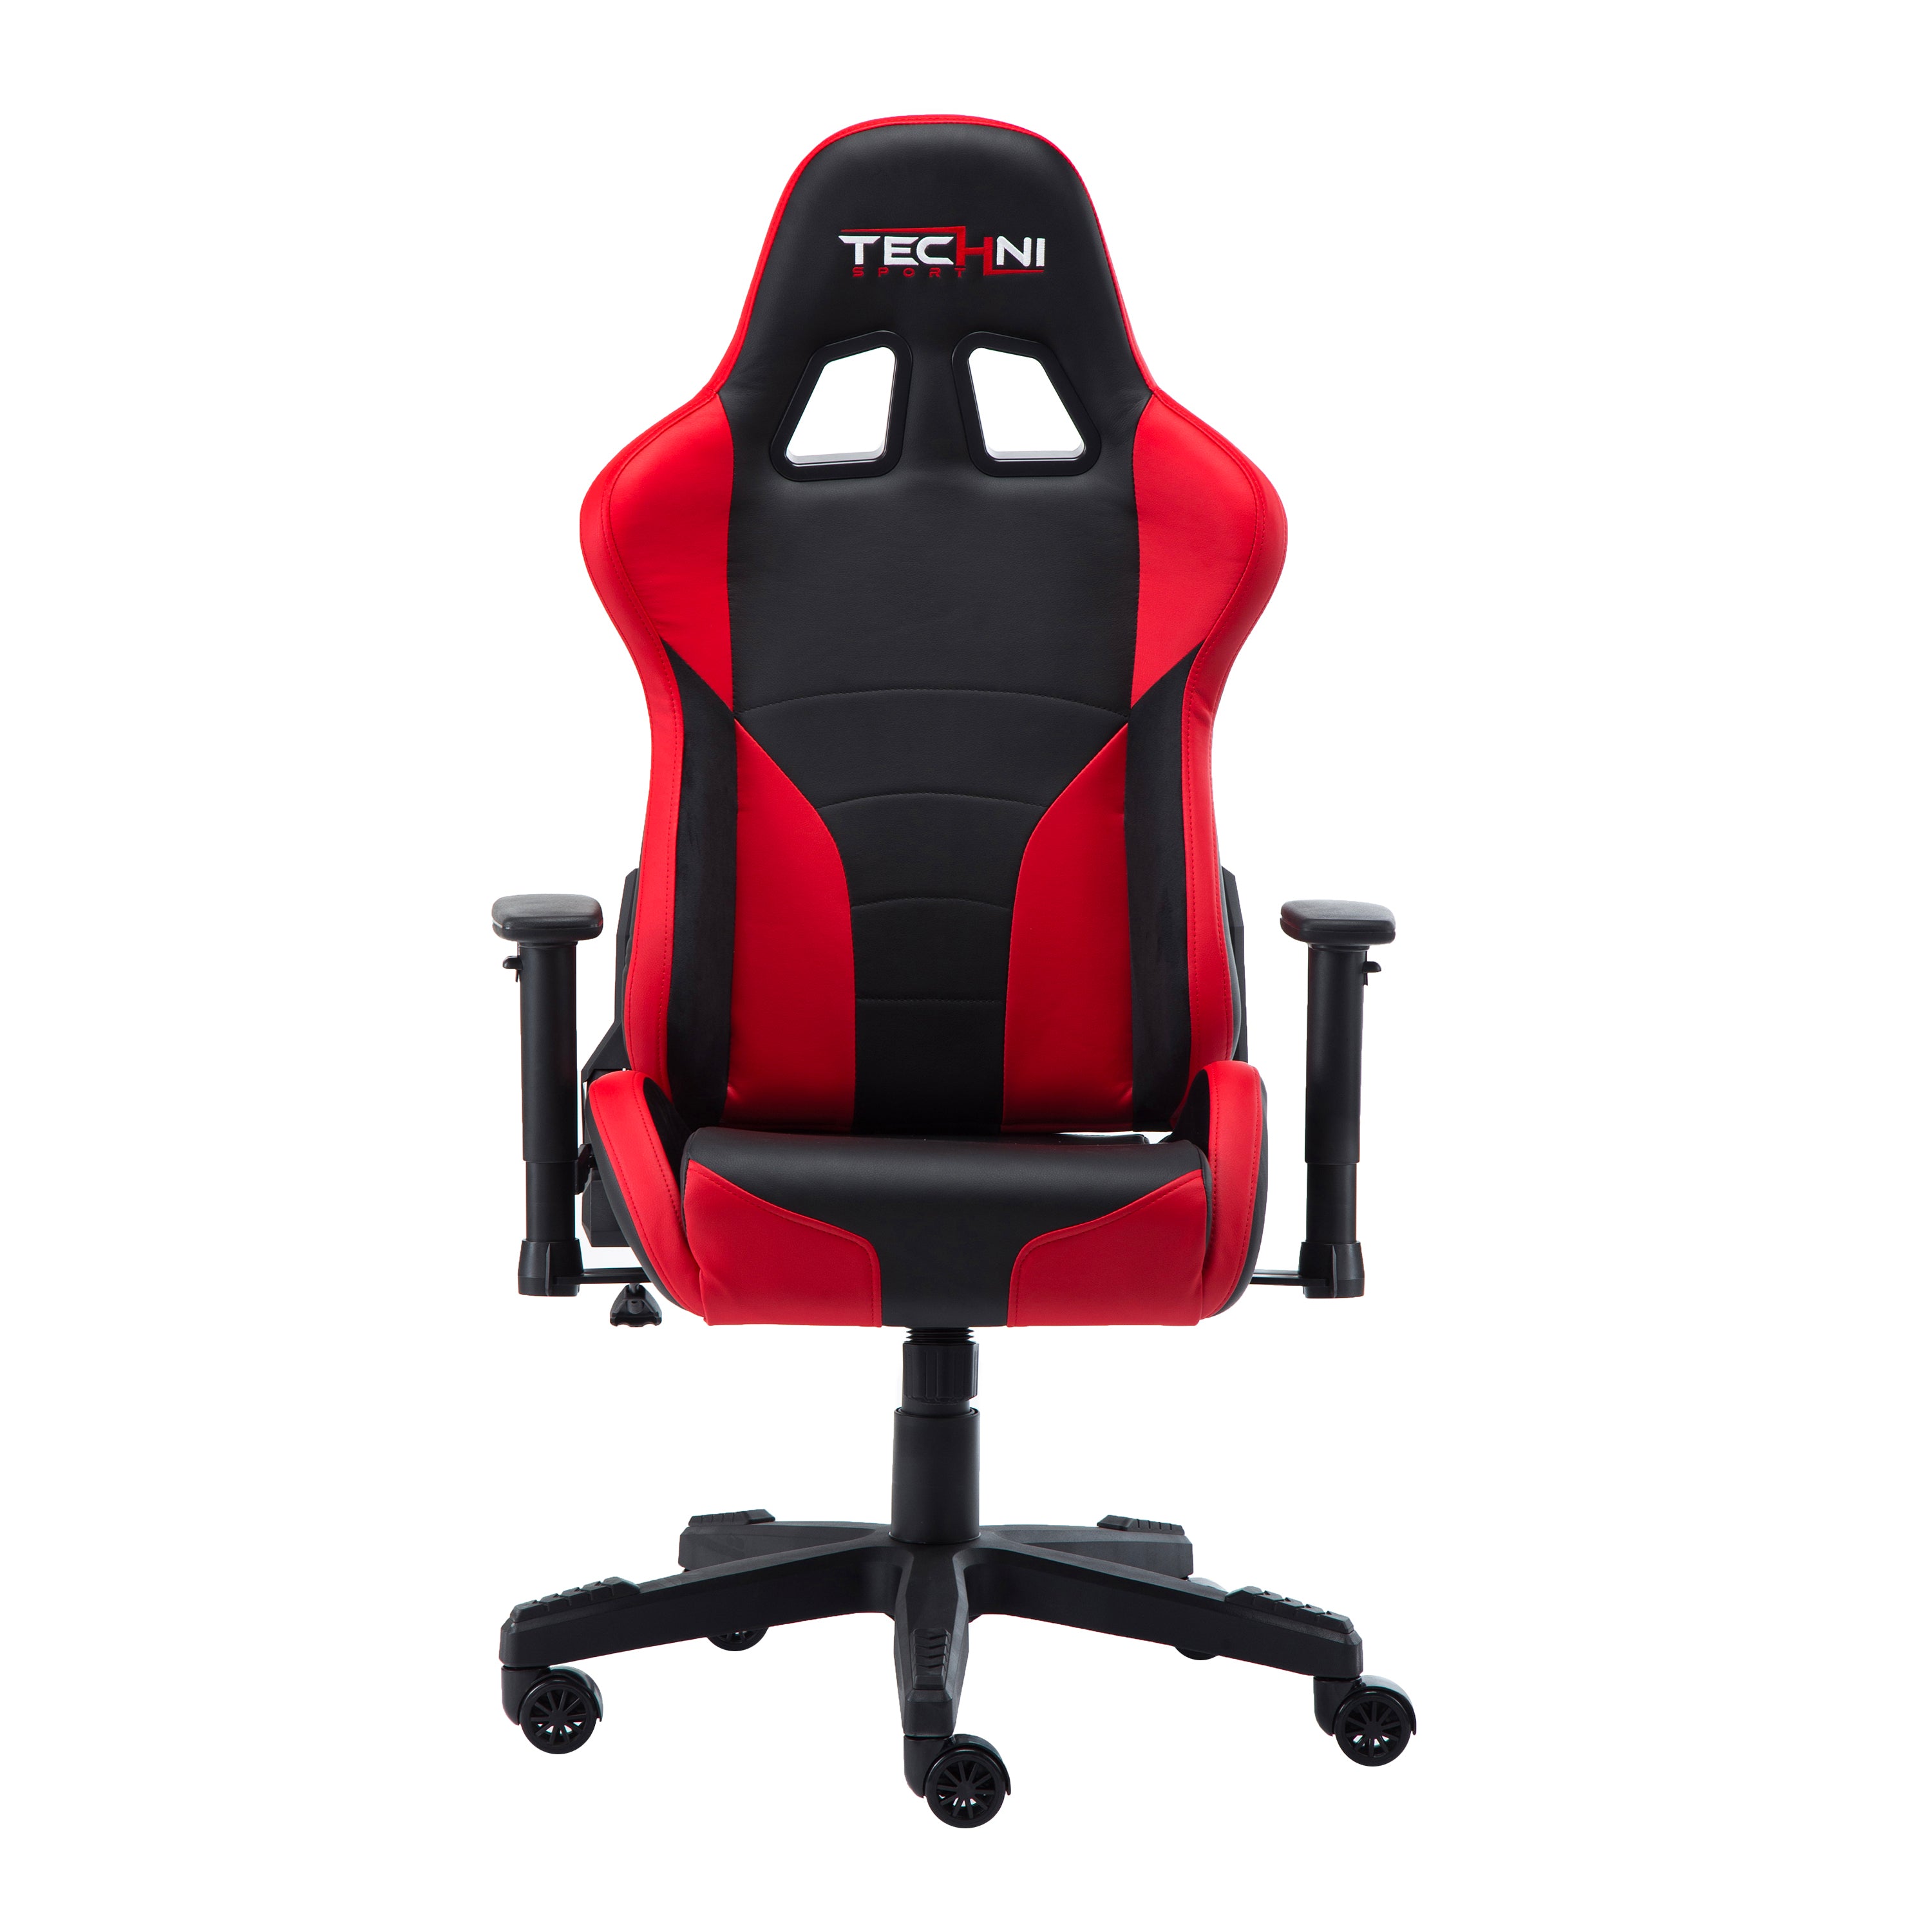 Techni Sport TS-90 Gaming Chair (Red)